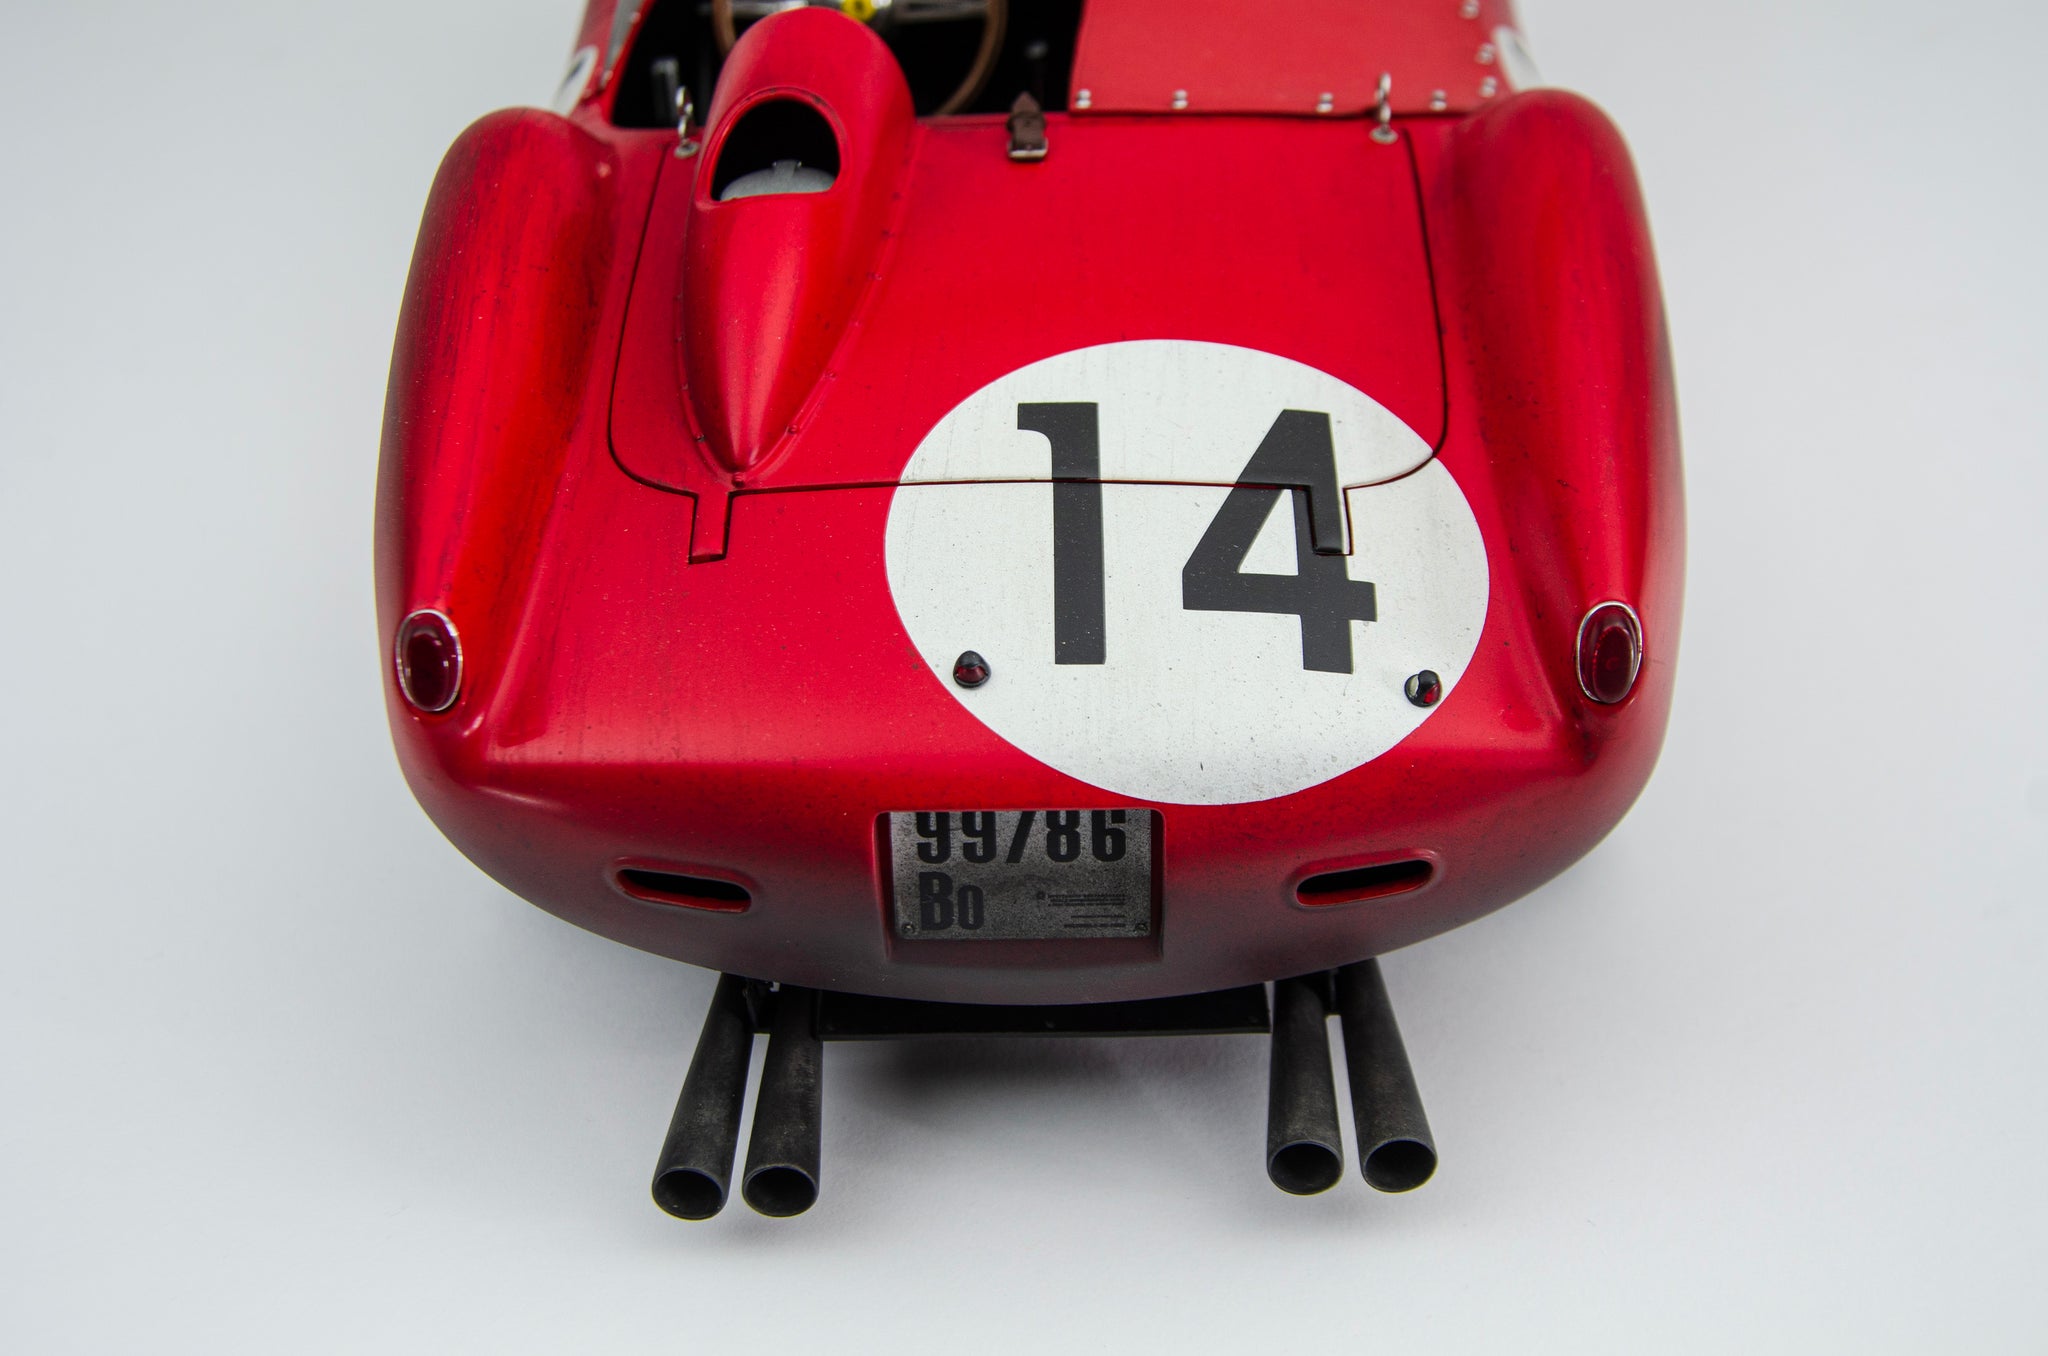 Ferrari 250 TR Race Weathered at 1:8 scale